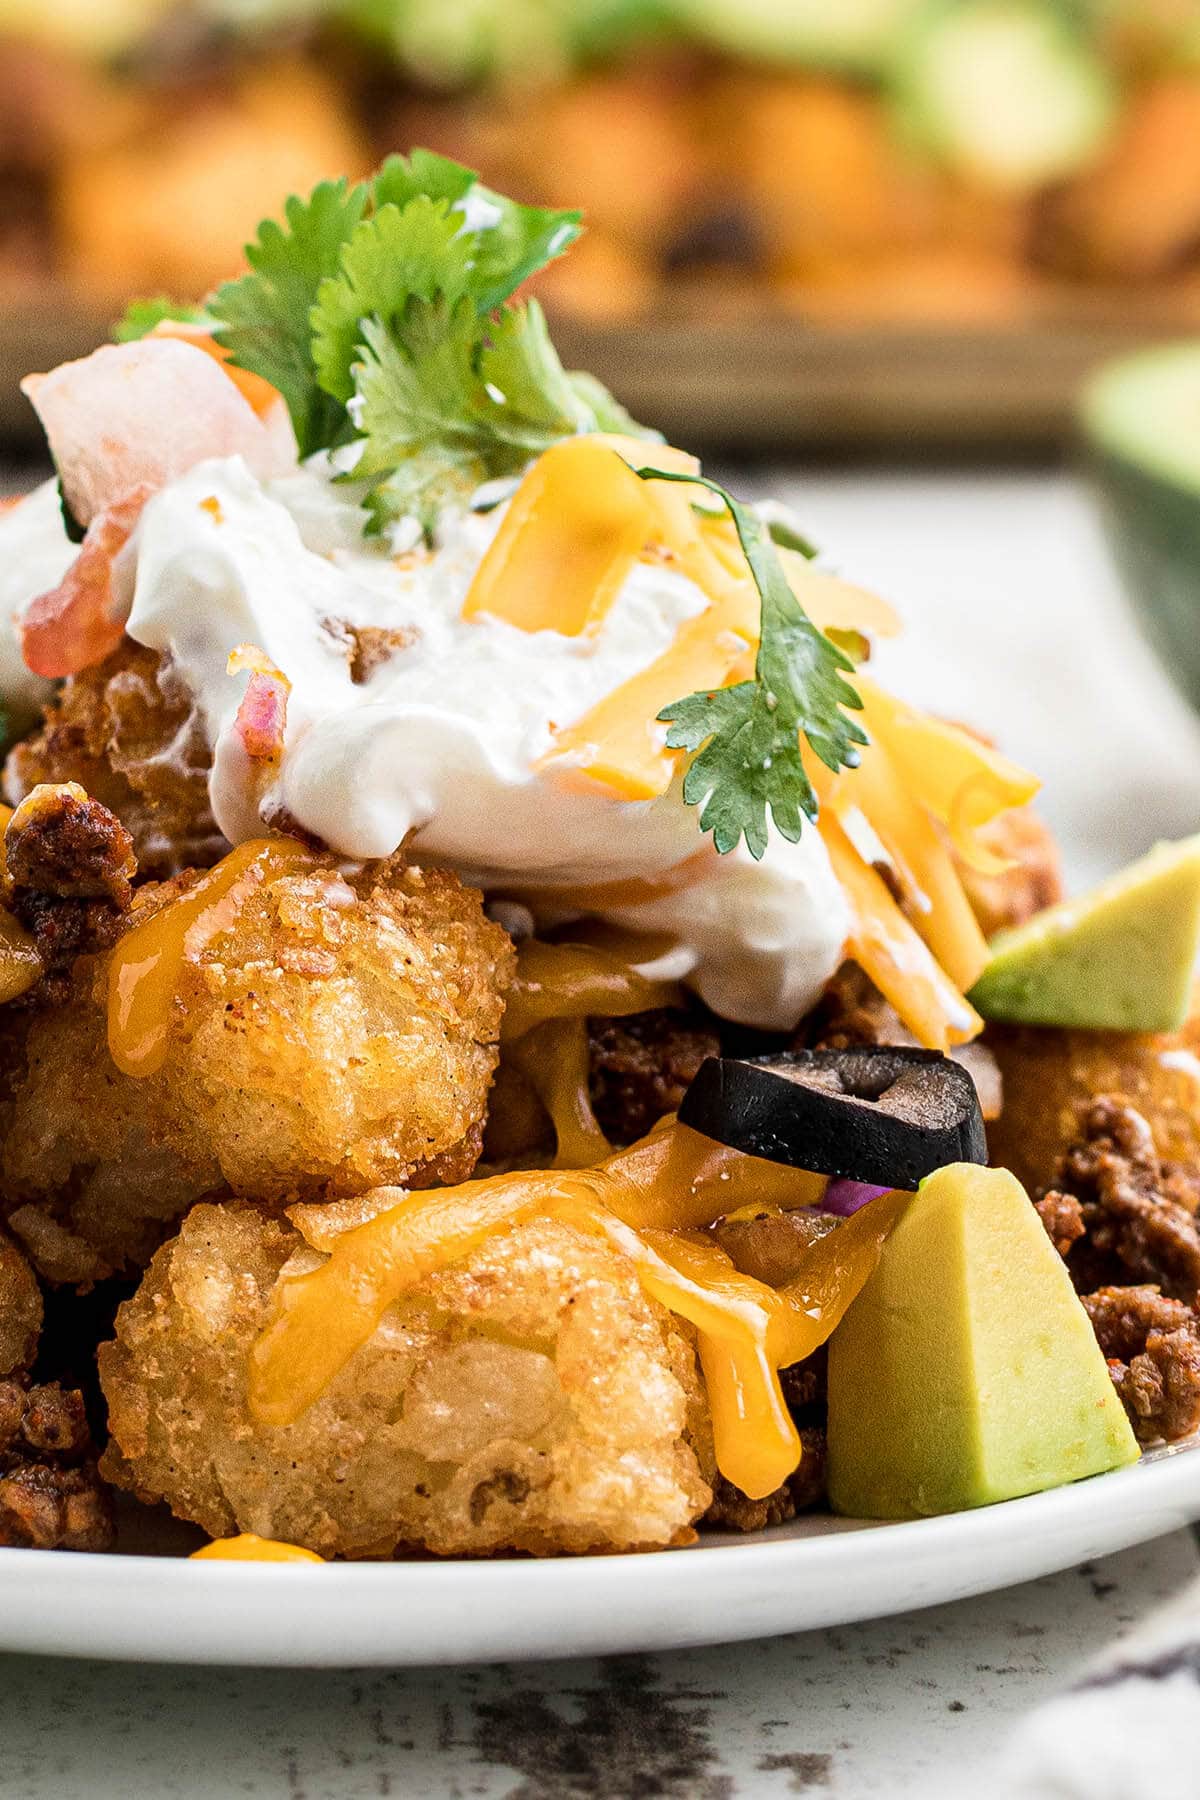 Nachos on plate, piled high with all the fixings.